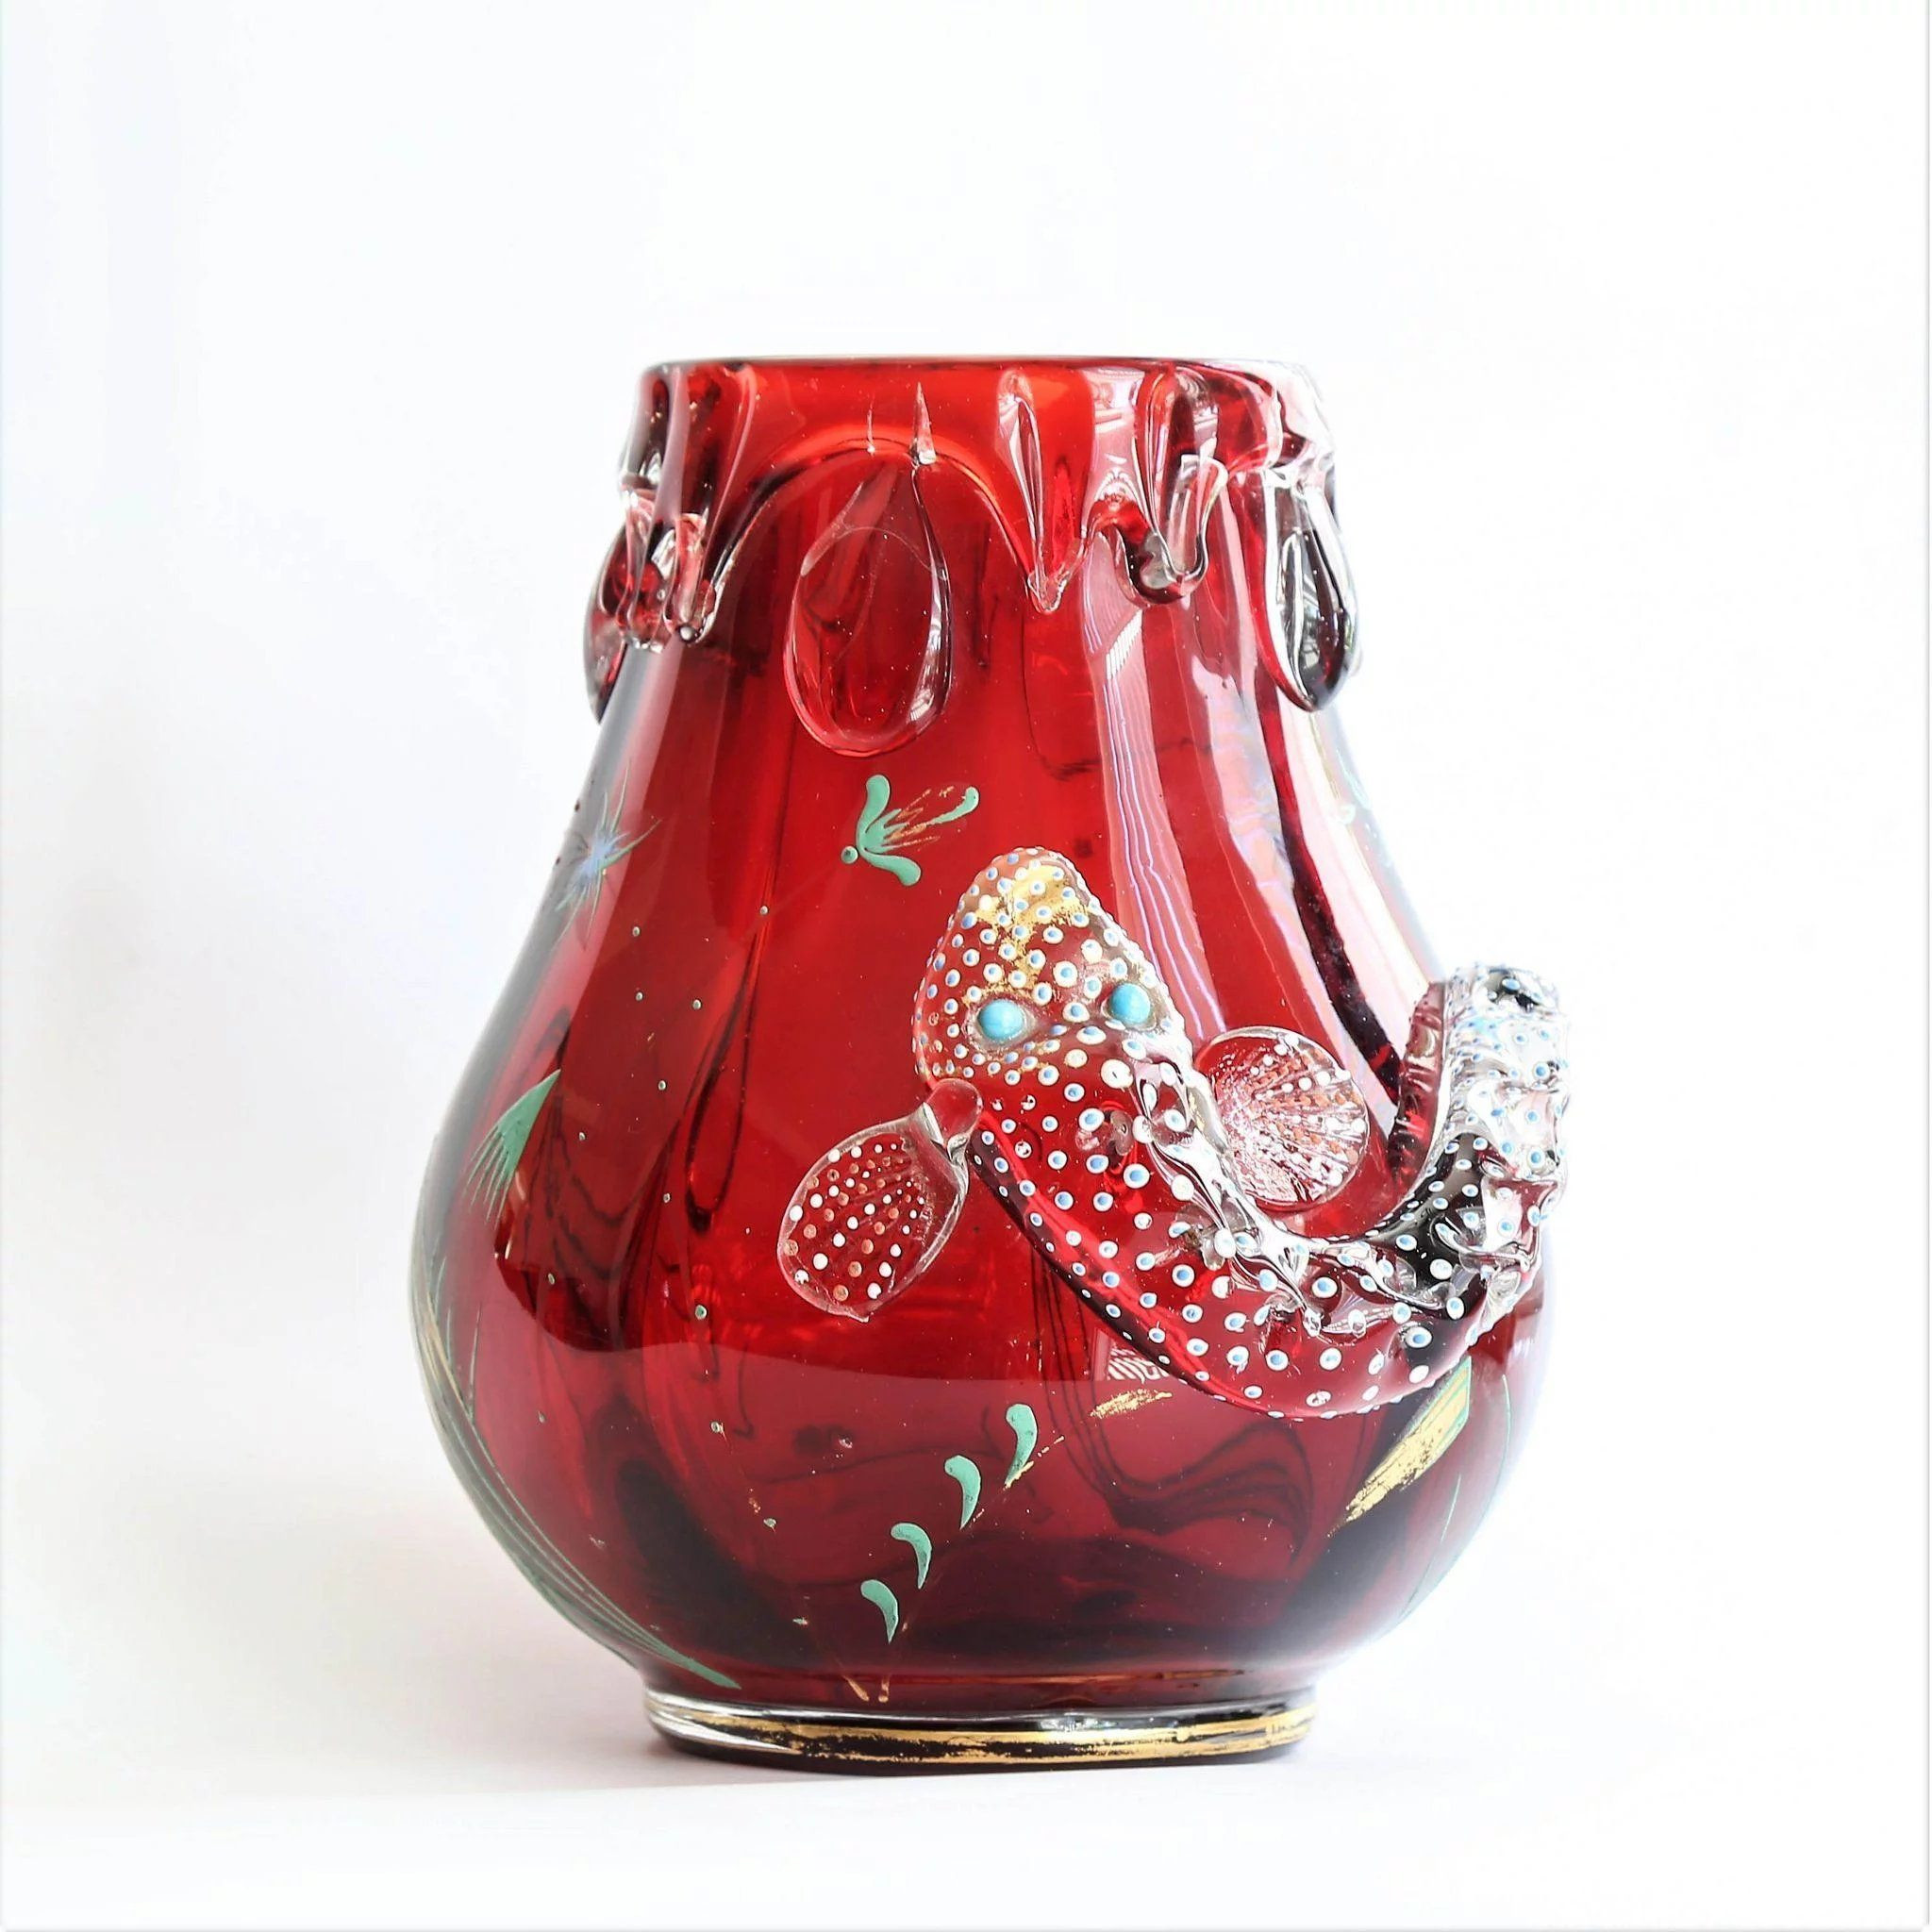 17 Spectacular Glass Vase for Fish 2024 free download glass vase for fish of rare circa 1900 moser ruby red vase with enameled fish in 2018 with title rare circa 1900 moser ruby red vase with enameled fish price 995 usd category antiquesby peri